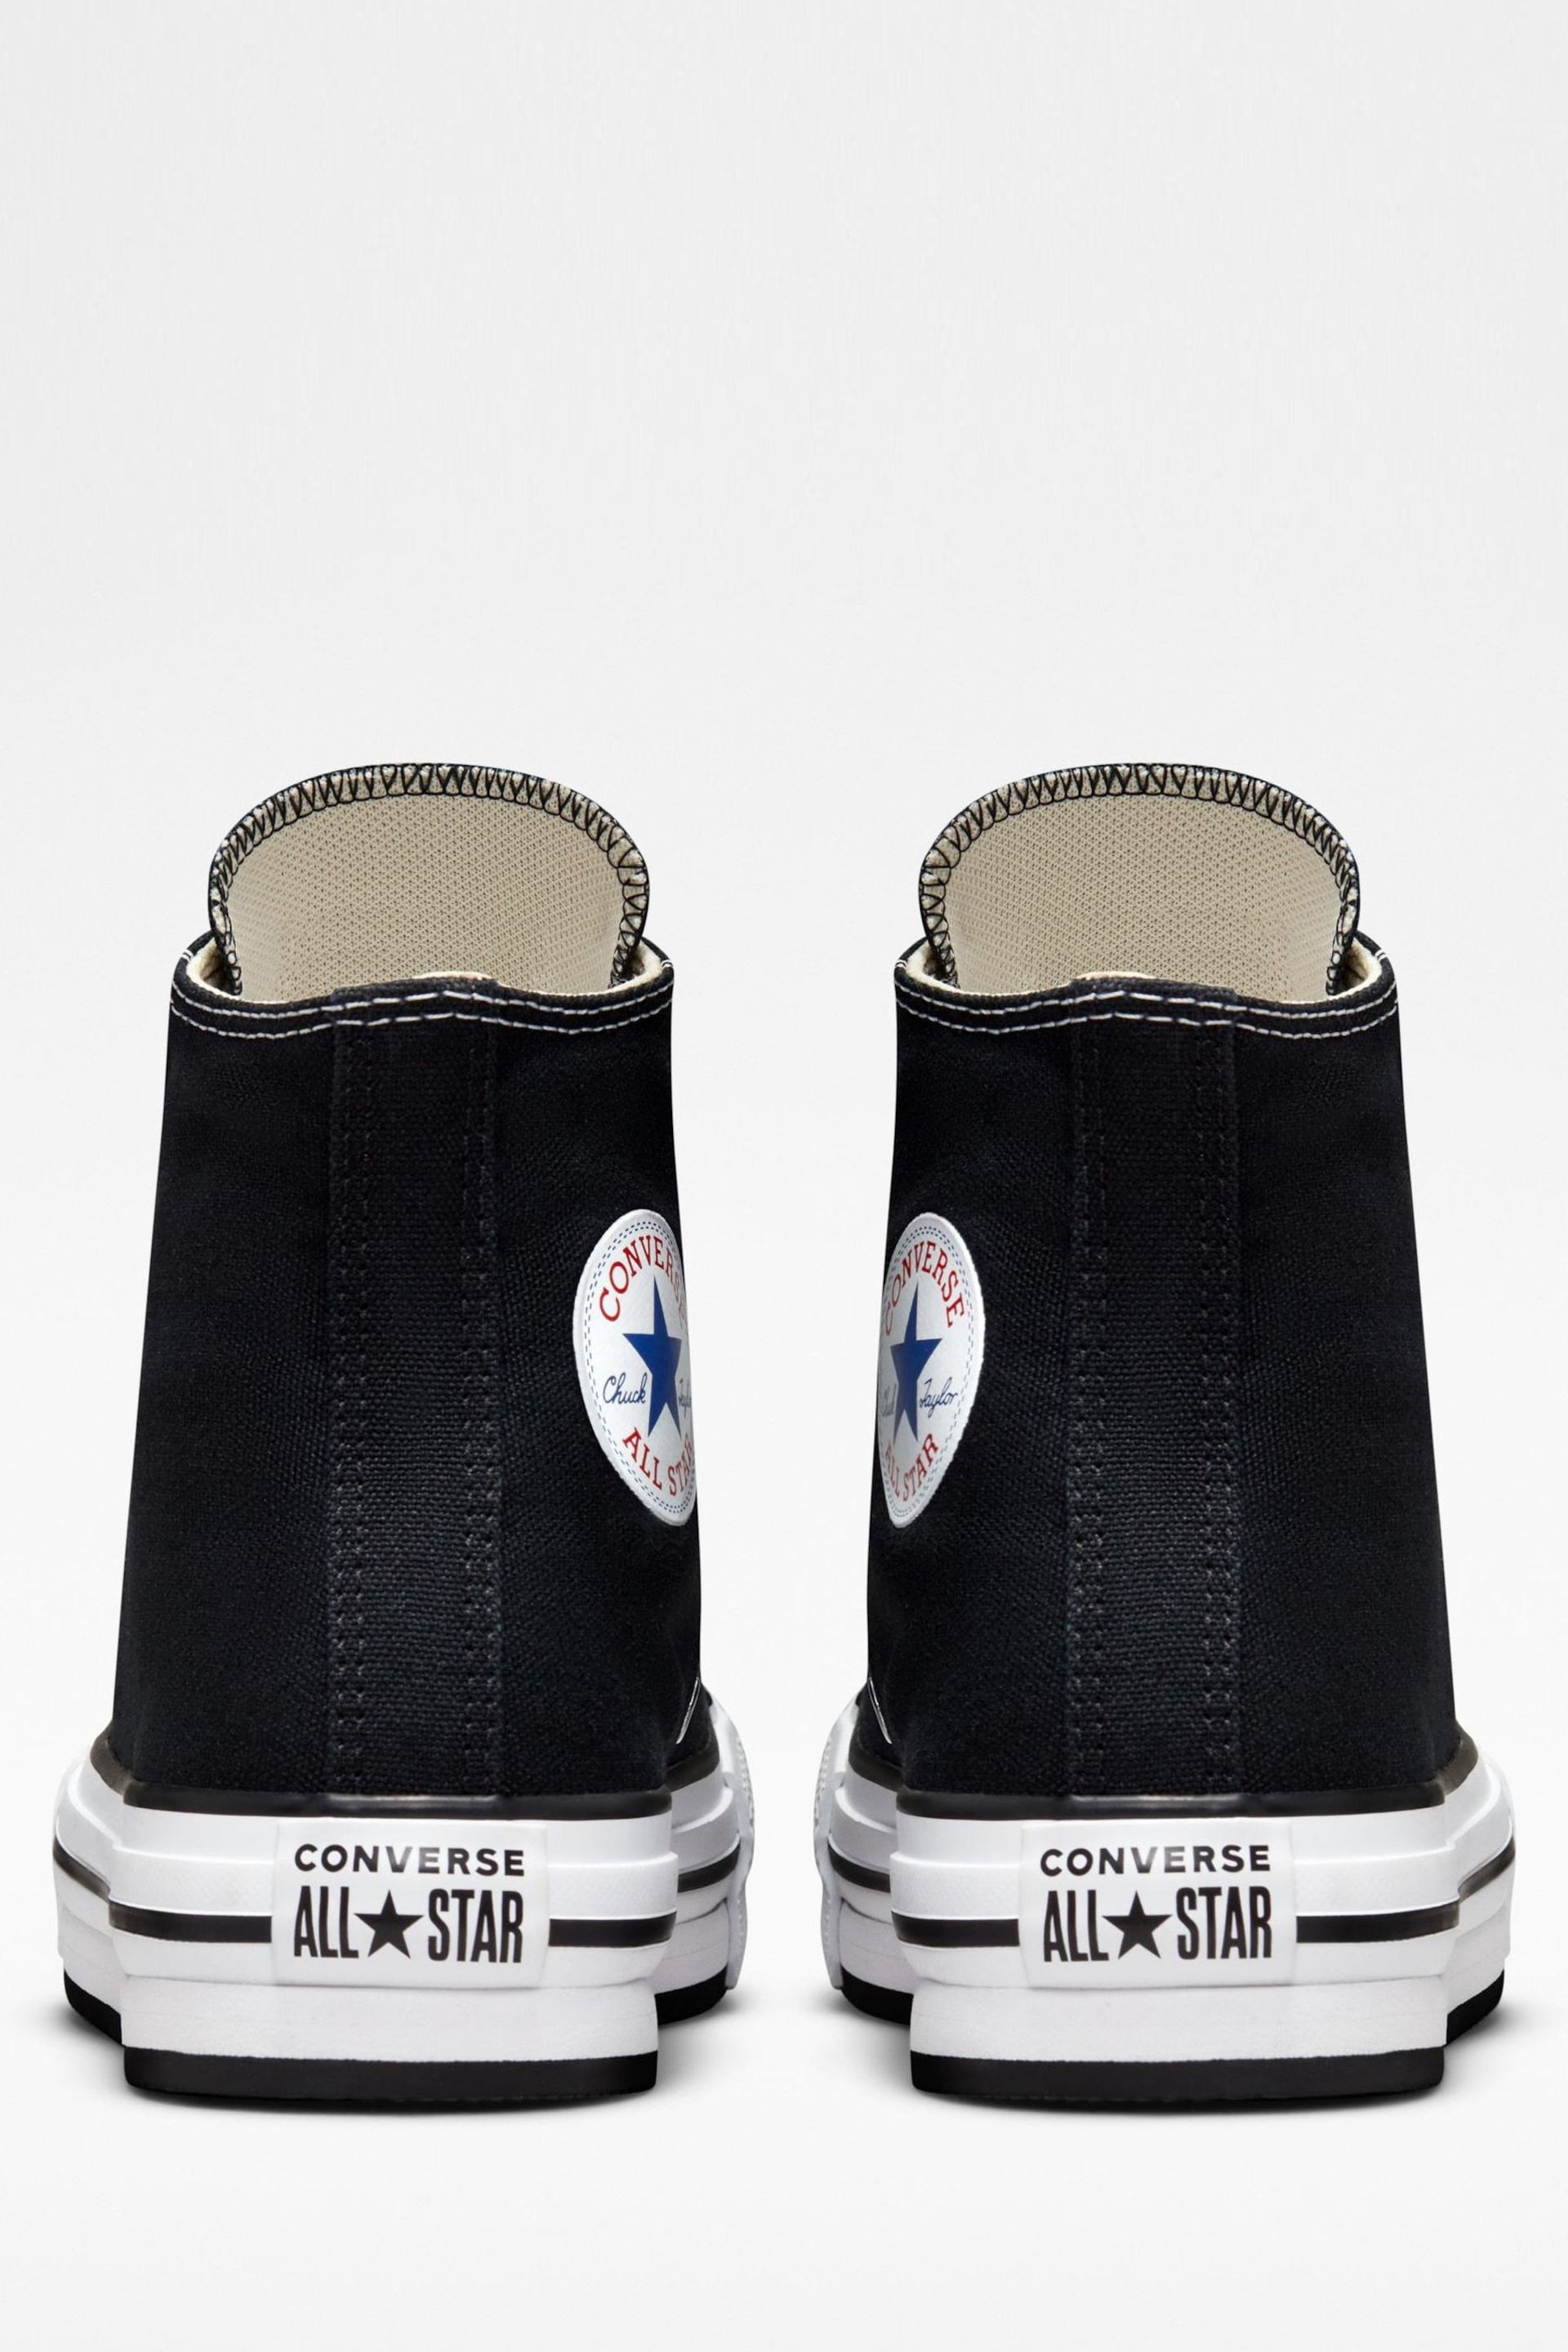 Converse Black Eva Lift High Top Youth Trainers - Image 4 of 8